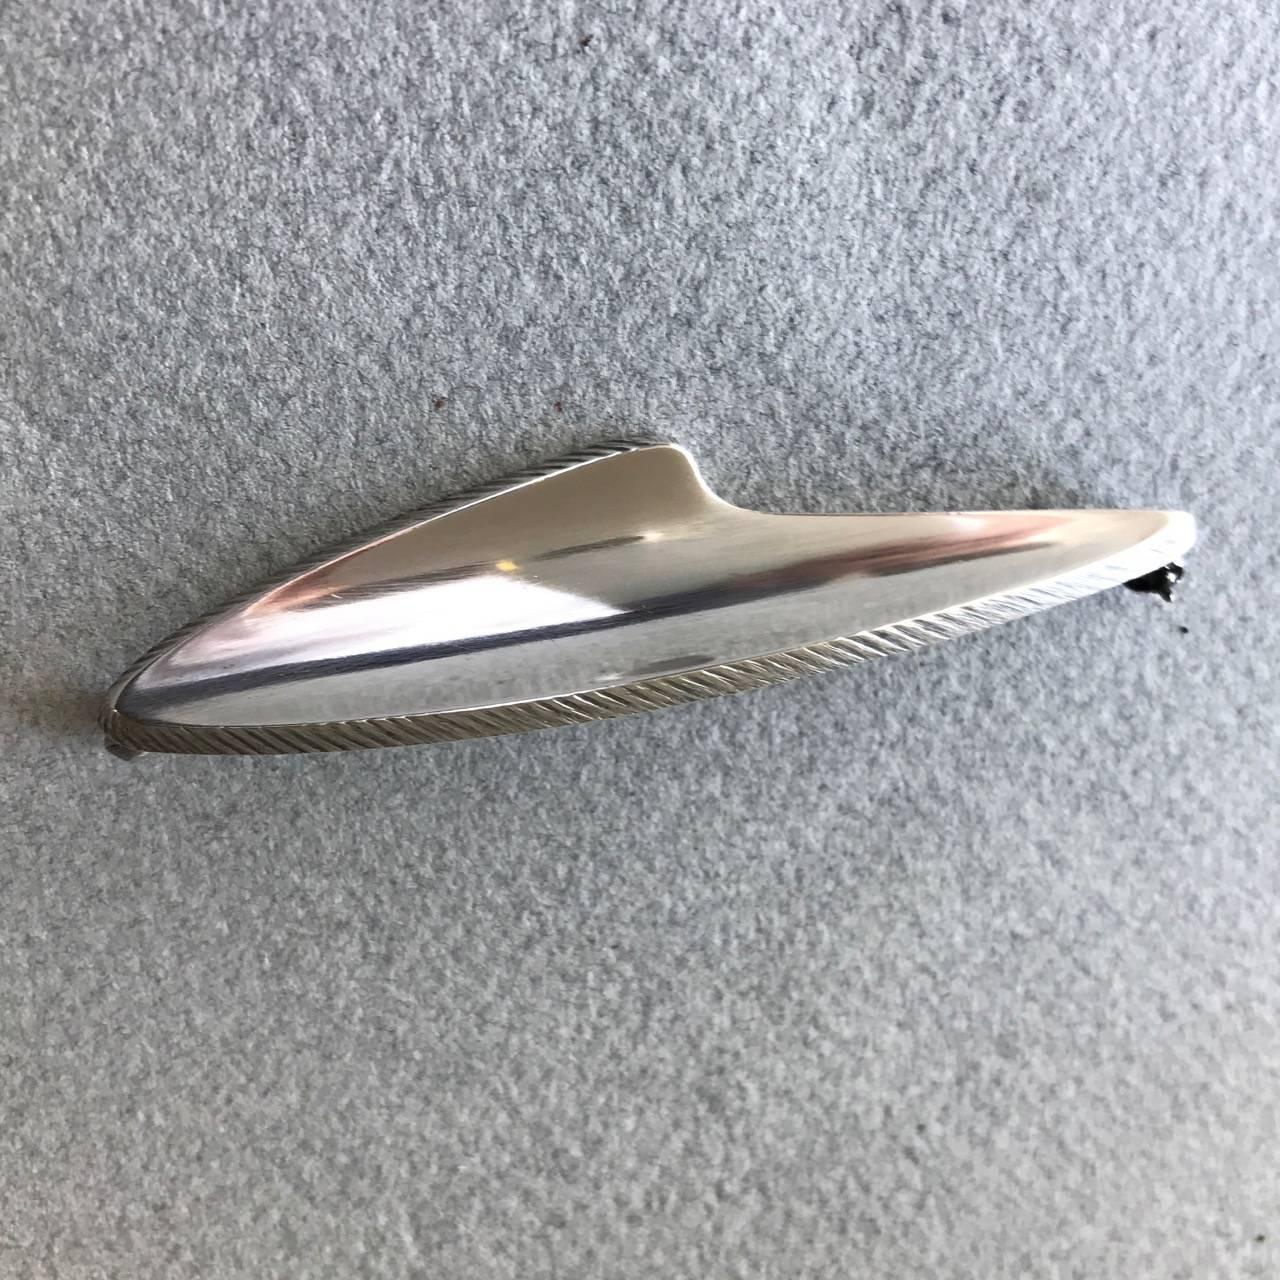 Bent Knudsen Sterling Silver Brooch

Futuristic sterling silver brooch by Danish designer Bent Knudsen.

Complimentary gift box and FREE shipping included.

About the designer:
Bent Knudsen was born in 1924 in Kolding, Denmark. At the young age of